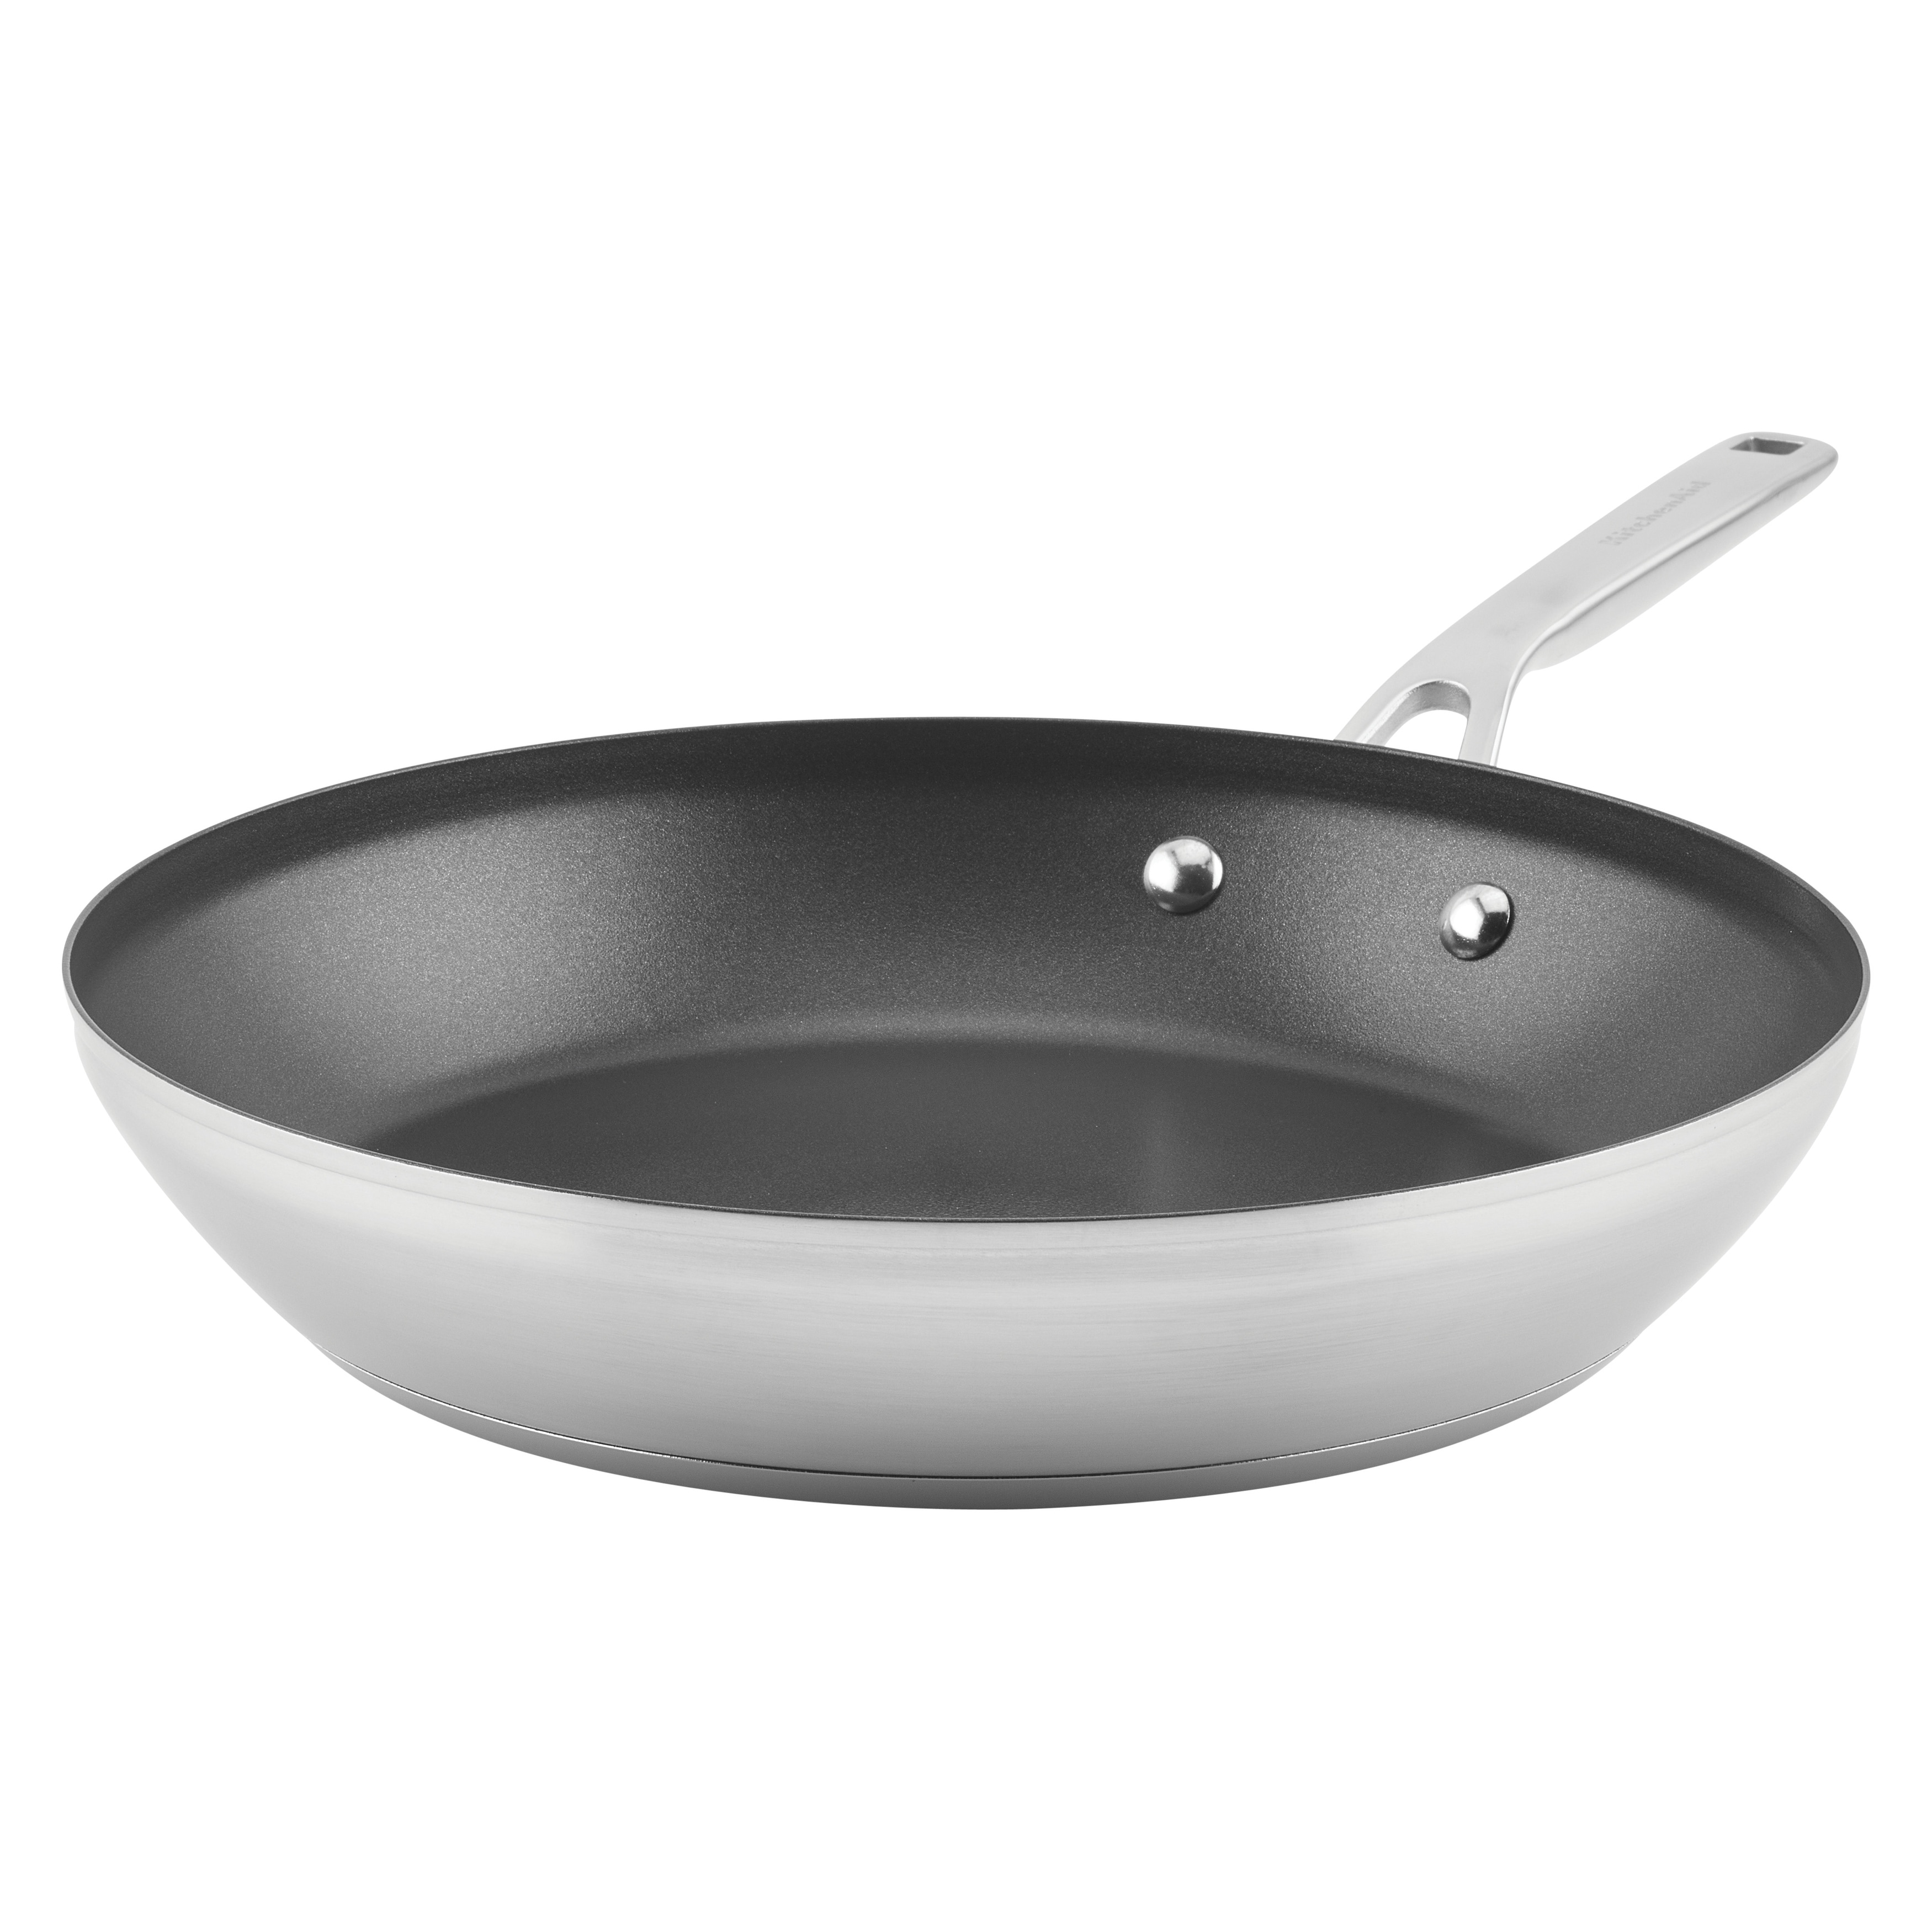 https://ak1.ostkcdn.com/images/products/is/images/direct/7286fd63a6032efda6dfb8da5ff9095f6f467ccb/KitchenAid-3-Ply-Base-Stainless-Steel-Nonstick-Induction-Frying-Pan%2C-12-Inch%2C-Brushed-Stainless-Steel.jpg